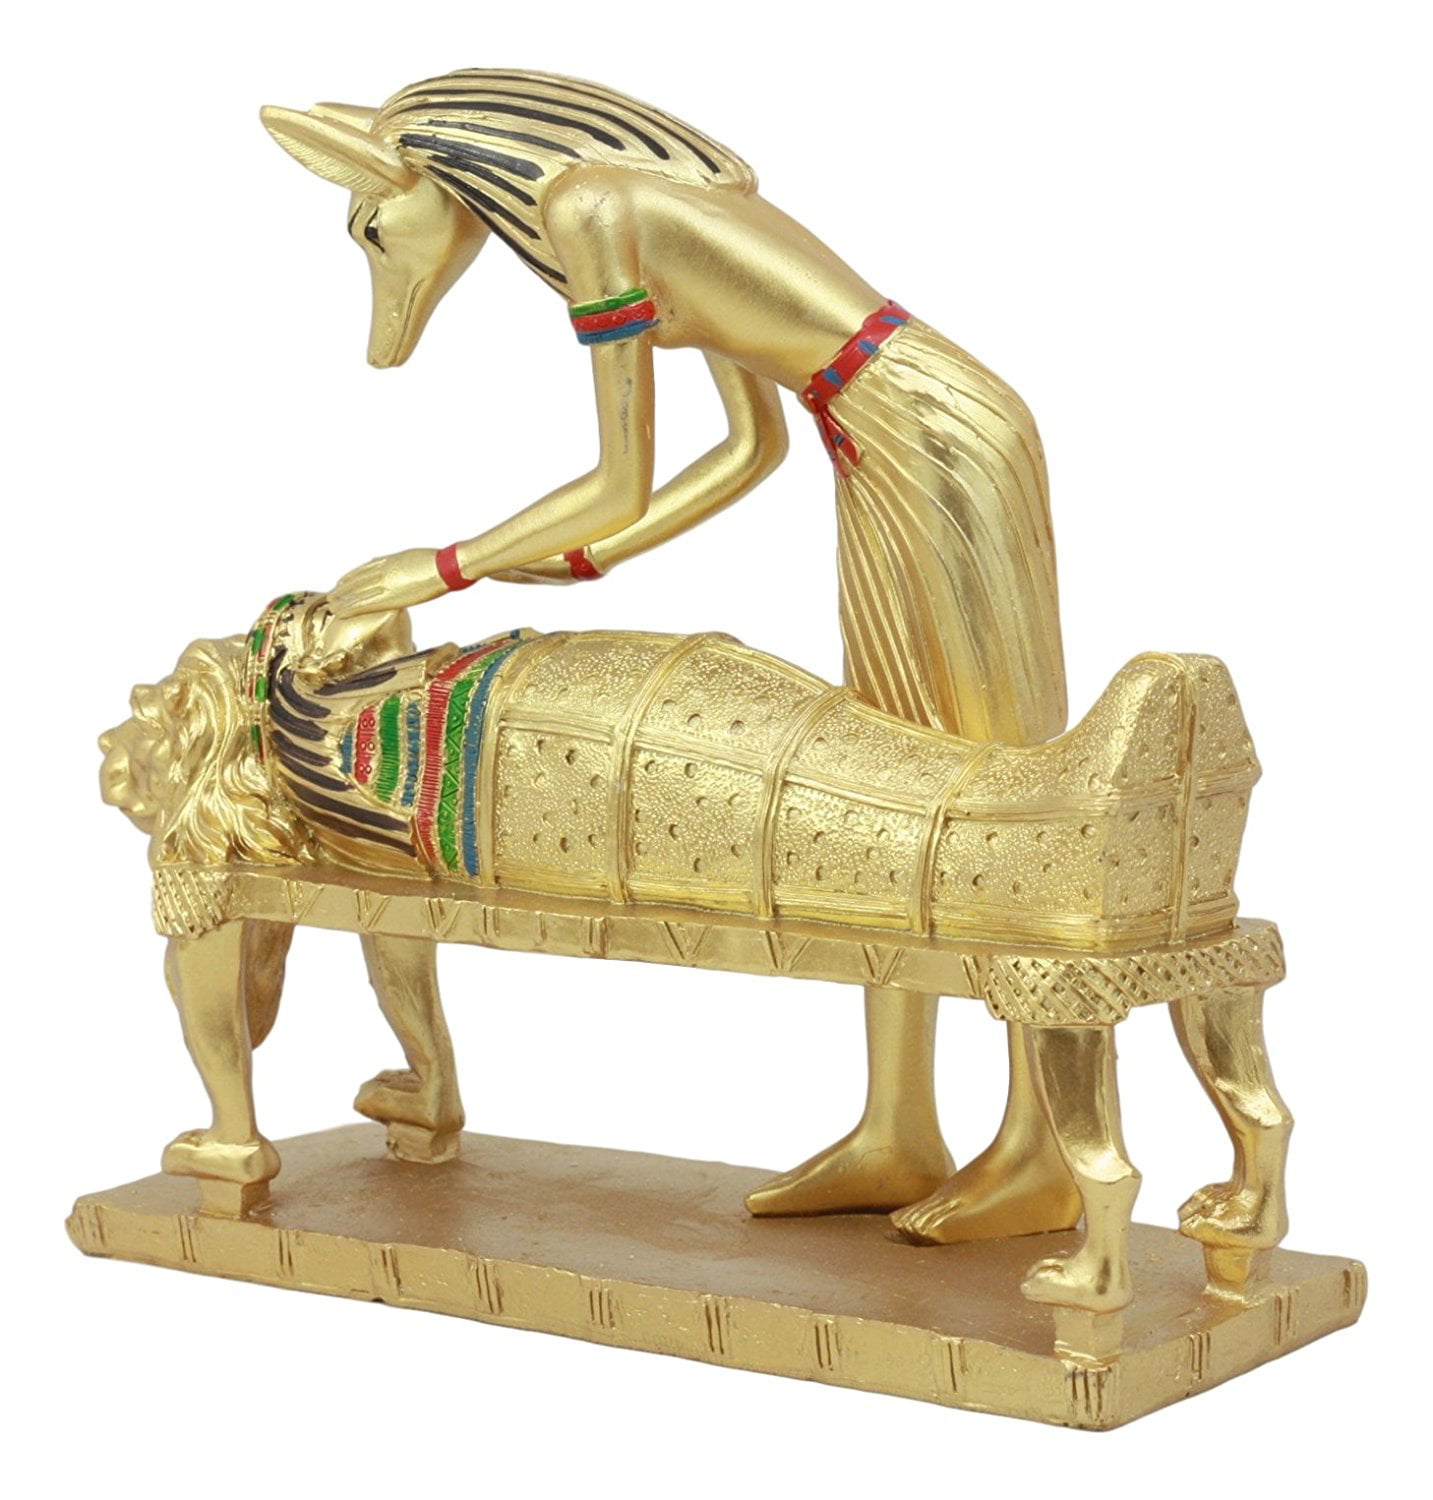 Ebros Ancient Egyptian Deity Golden Anubis Embalming Pharaoh Mummy Statue  Classical Egyptian God Of The Dead Guide To The Afterlife And Mummification  